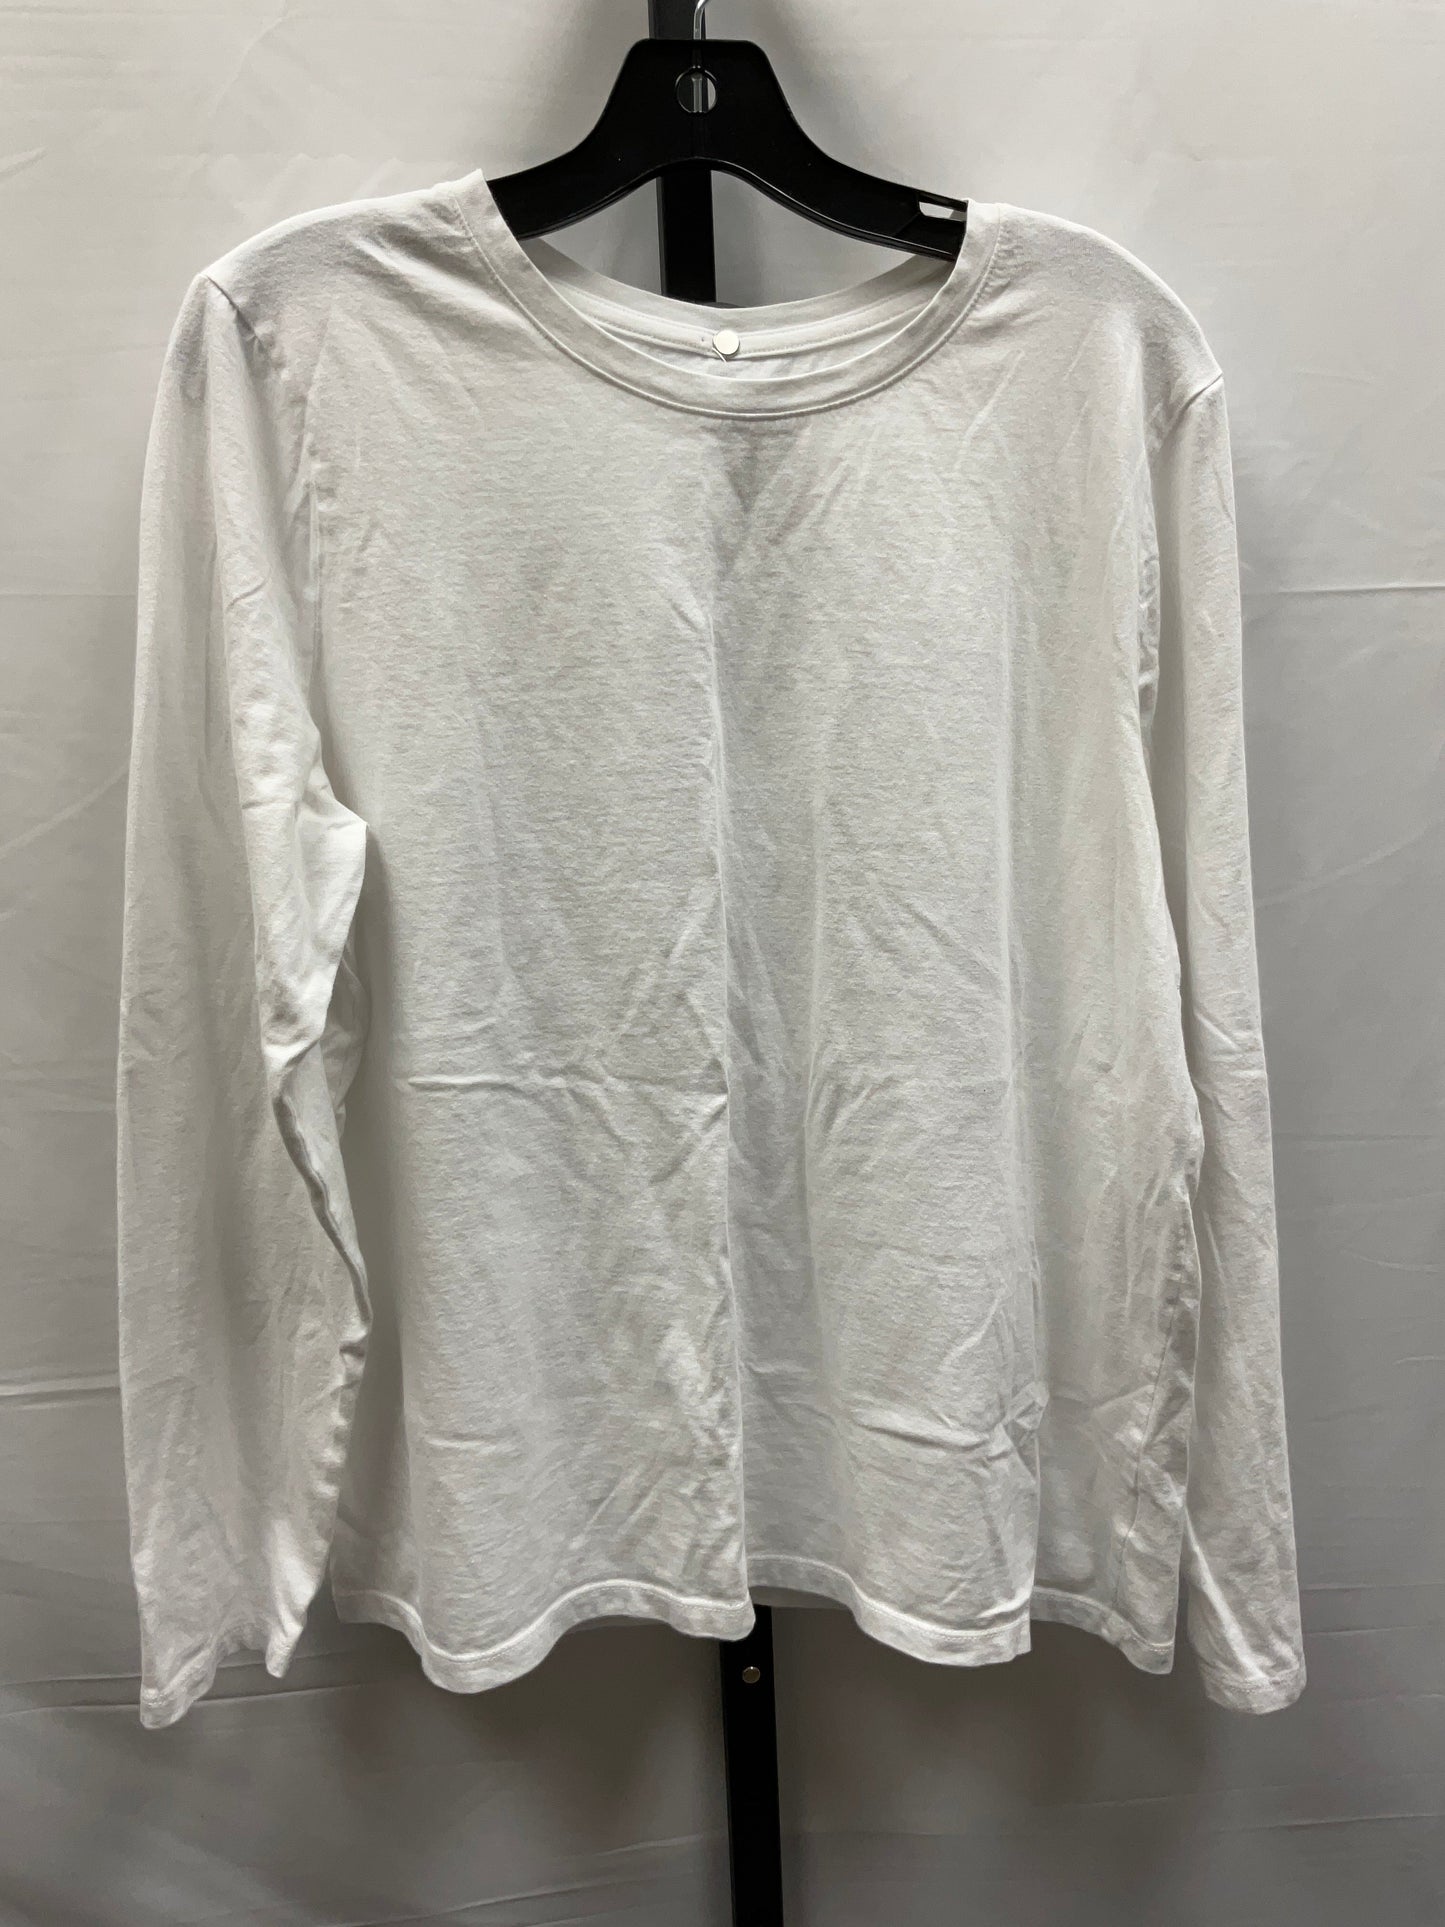 White Top Long Sleeve Basic Time And Tru, Size Xl